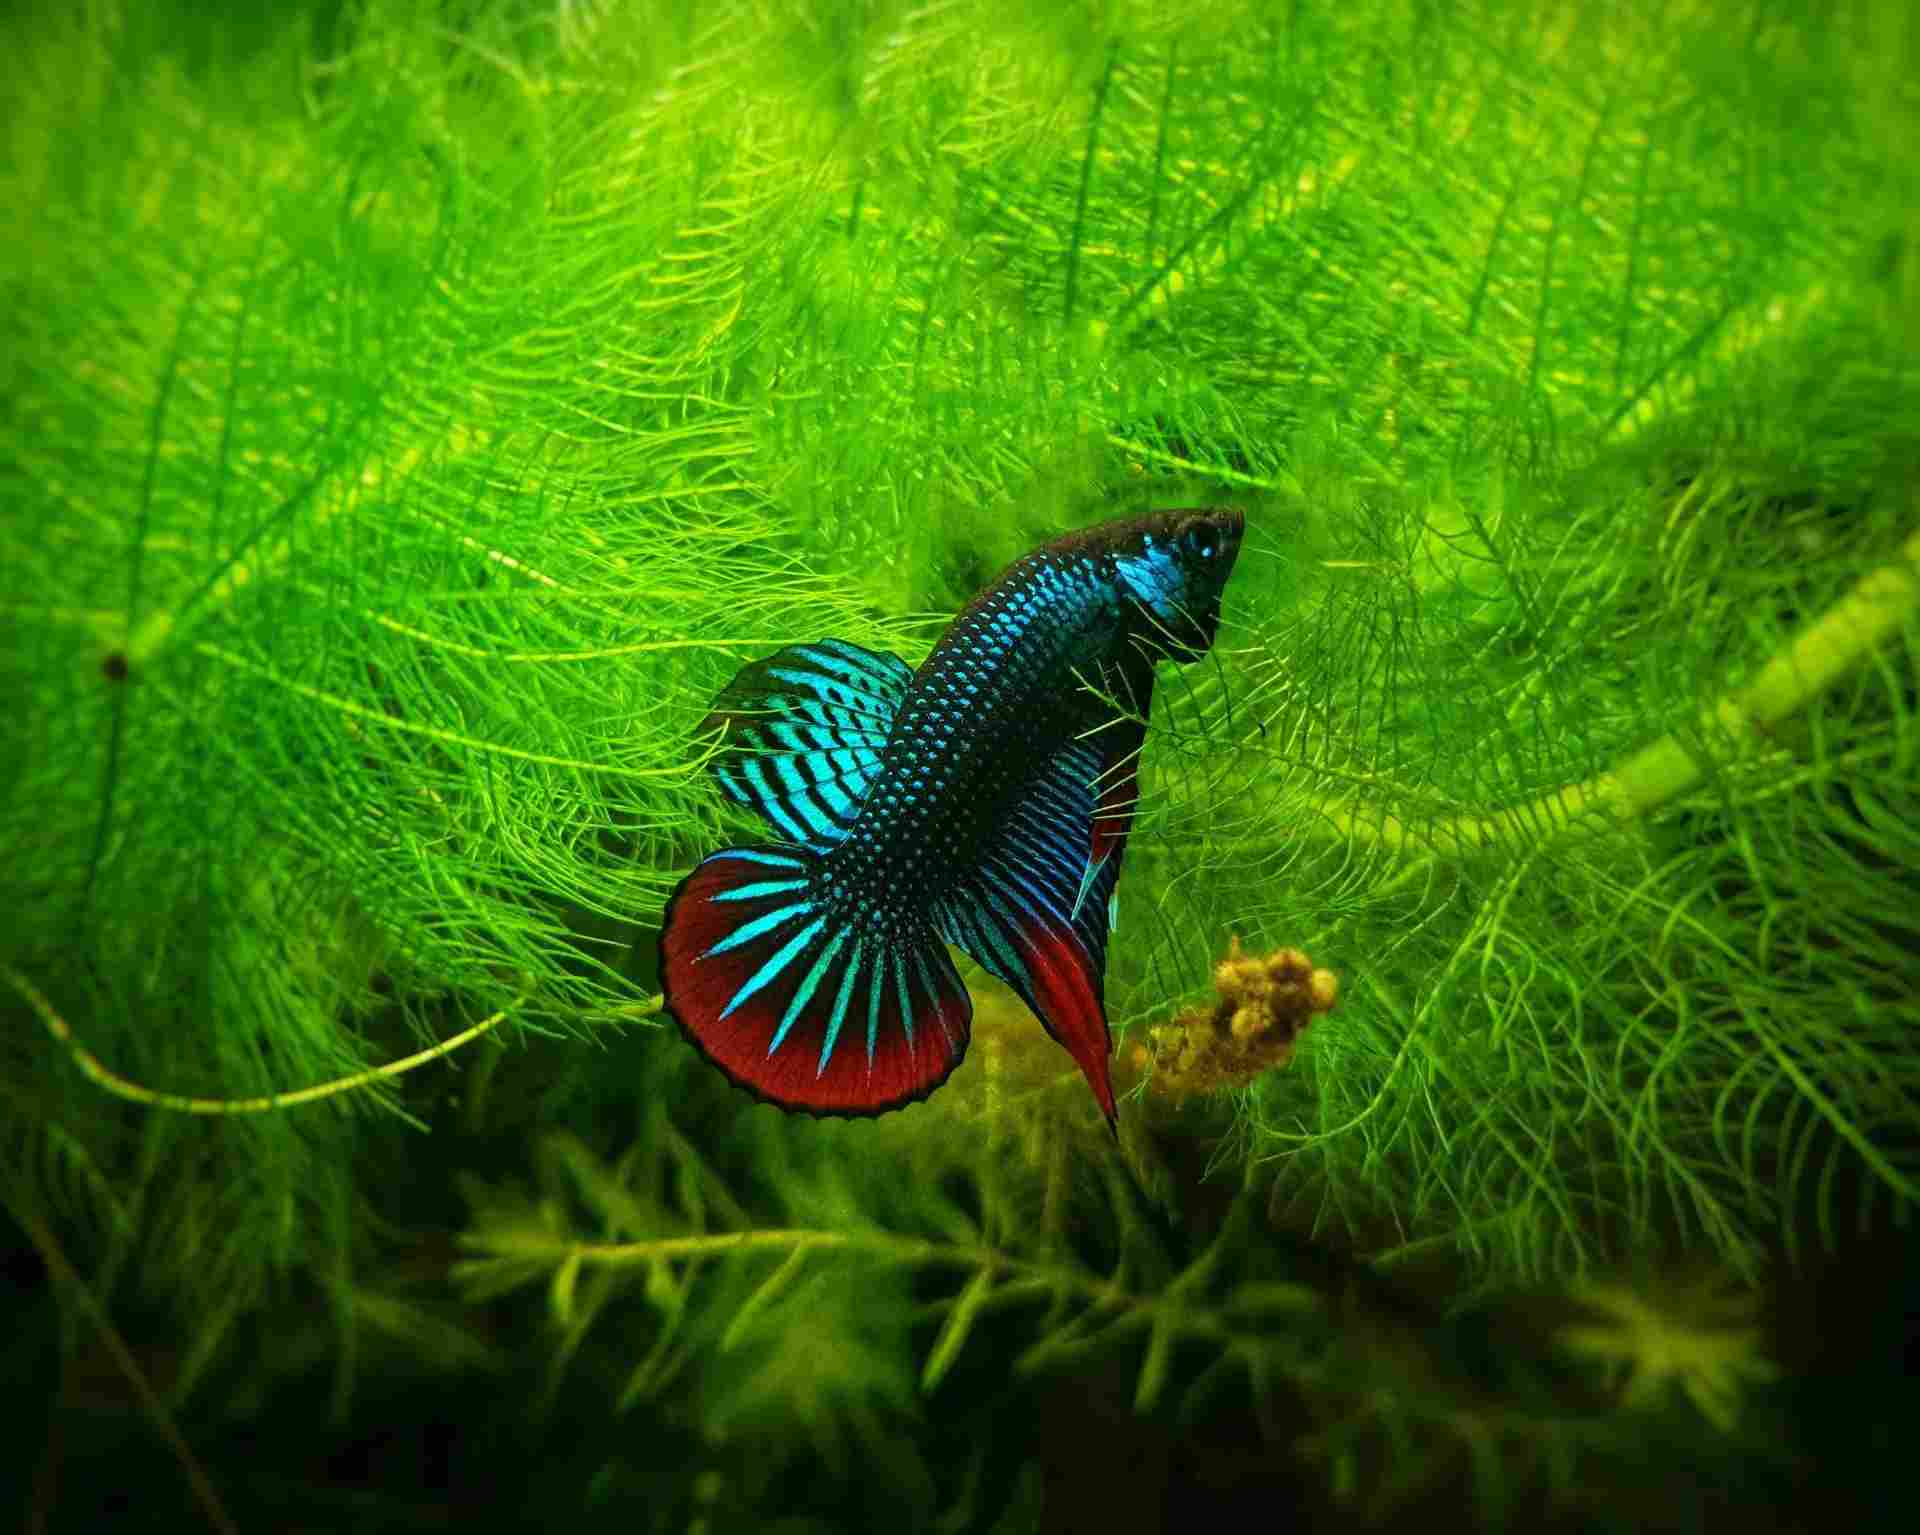 The tank should be maintained at 70-80F for a healthy Betta.